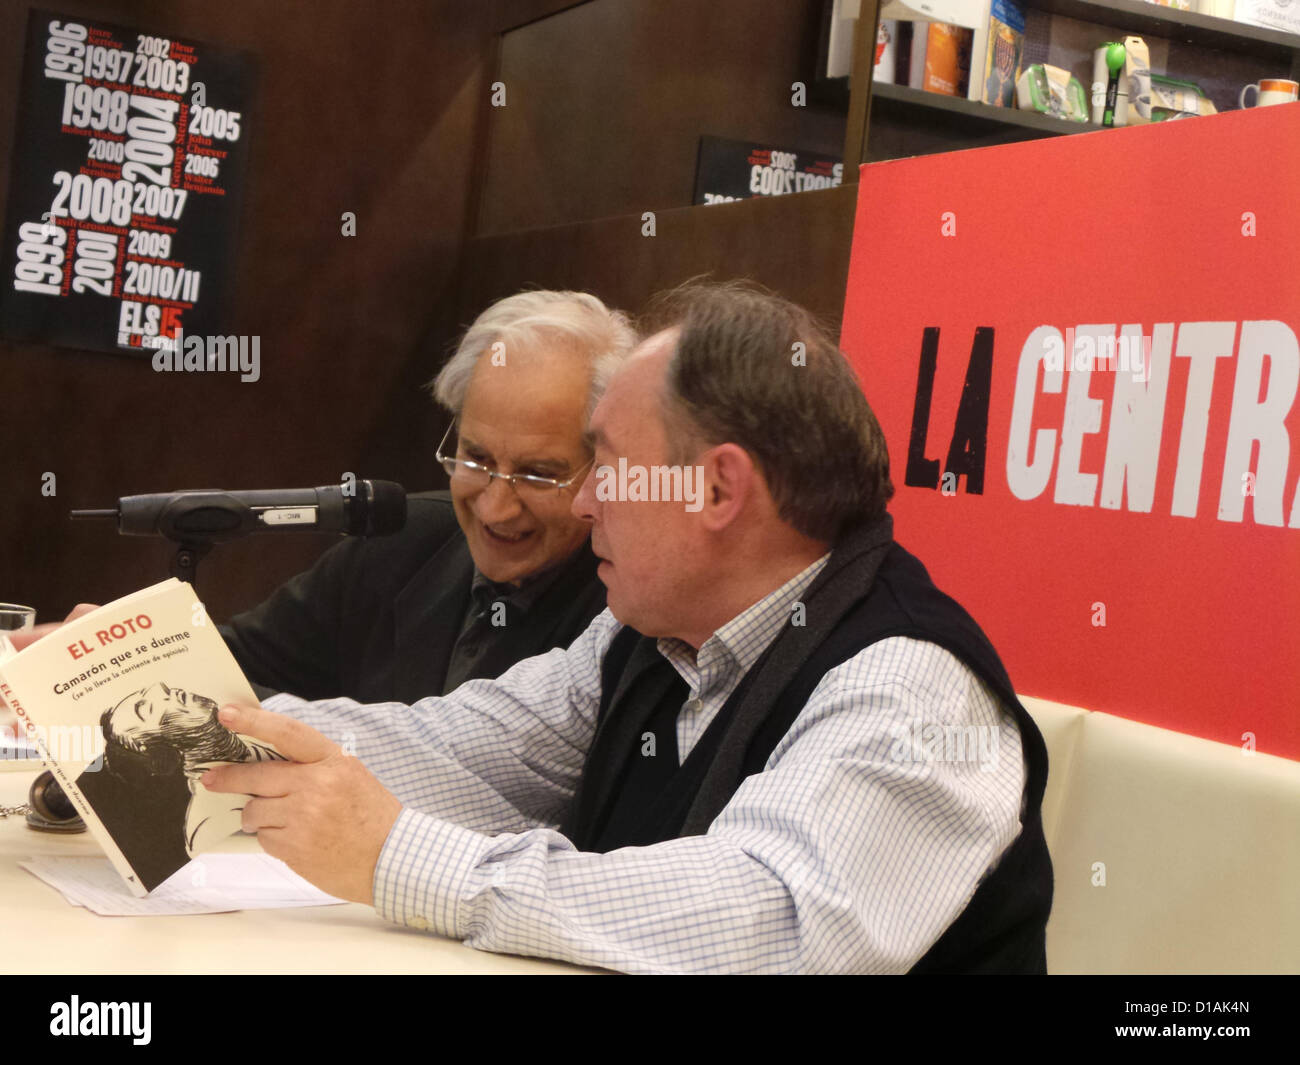 The cartoonist El Roto, Andrés García Rábago (left) from the newspaper El Pais, presents his book in Barcelona. On December 12 at the bookstore La Central has presented his book 'Shrimp that falls asleep (it carries the current)' - 'Camarón que se duerme (se lo lleva la corriente)-, a fierce critique of the media from this veteran cartoonist, with journalist Gregorio Morán (right). Stock Photo